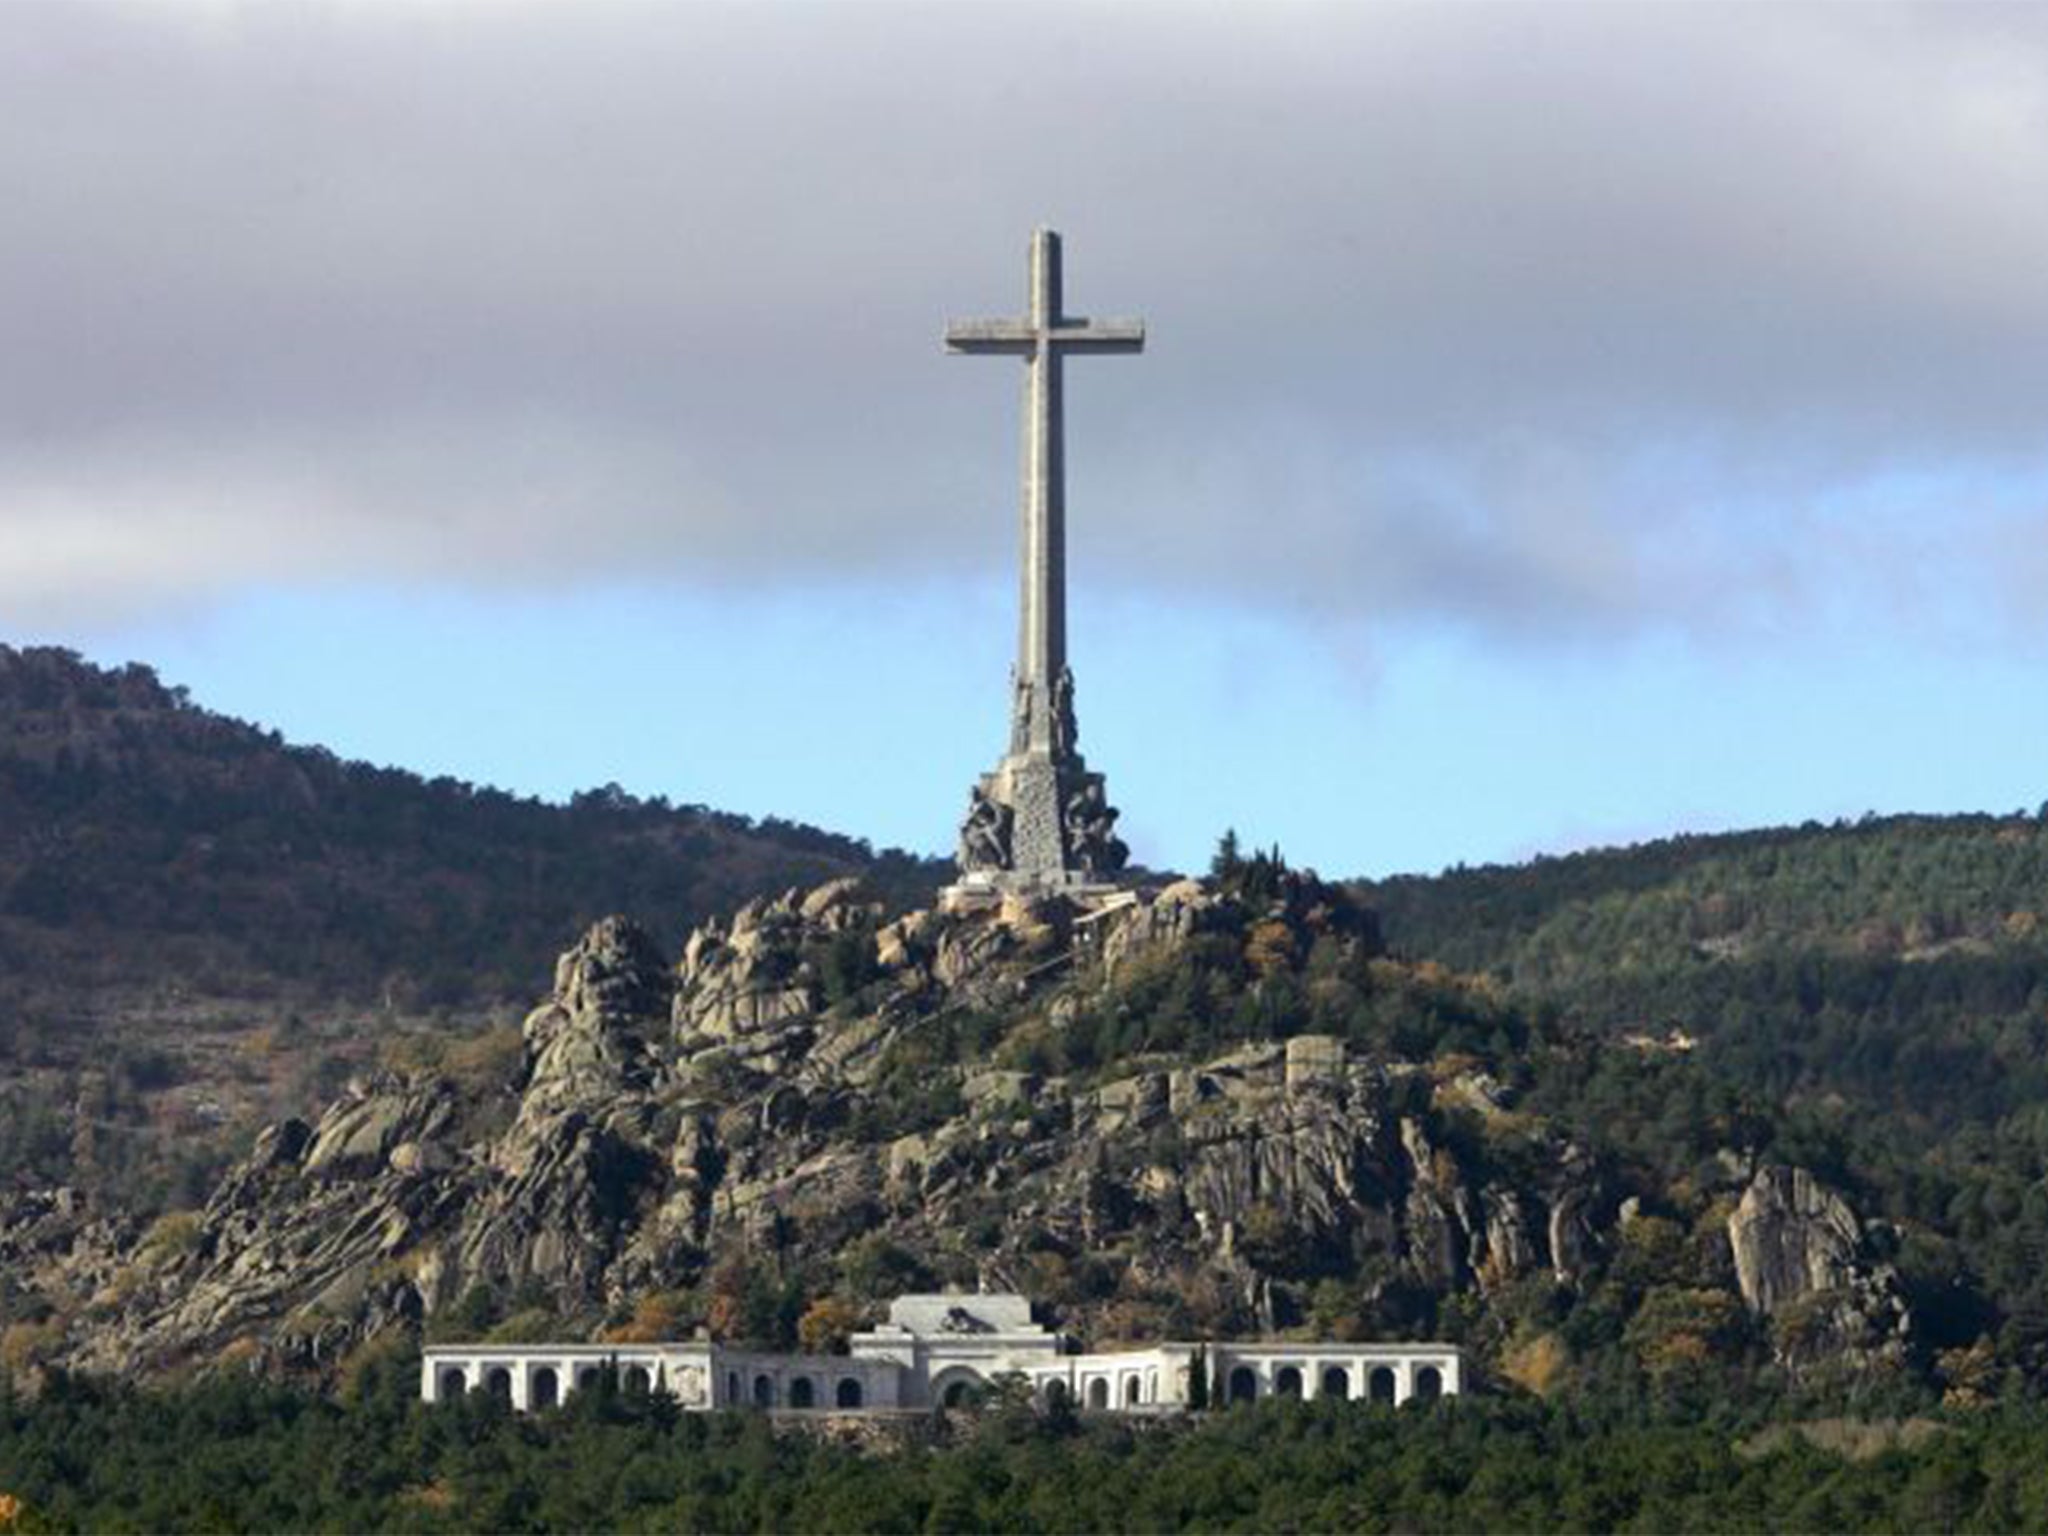 A view of the Valle de los Caidos (The Valley of the Fallen) a monument to the Francoist combatants who died during the Spanish civil war